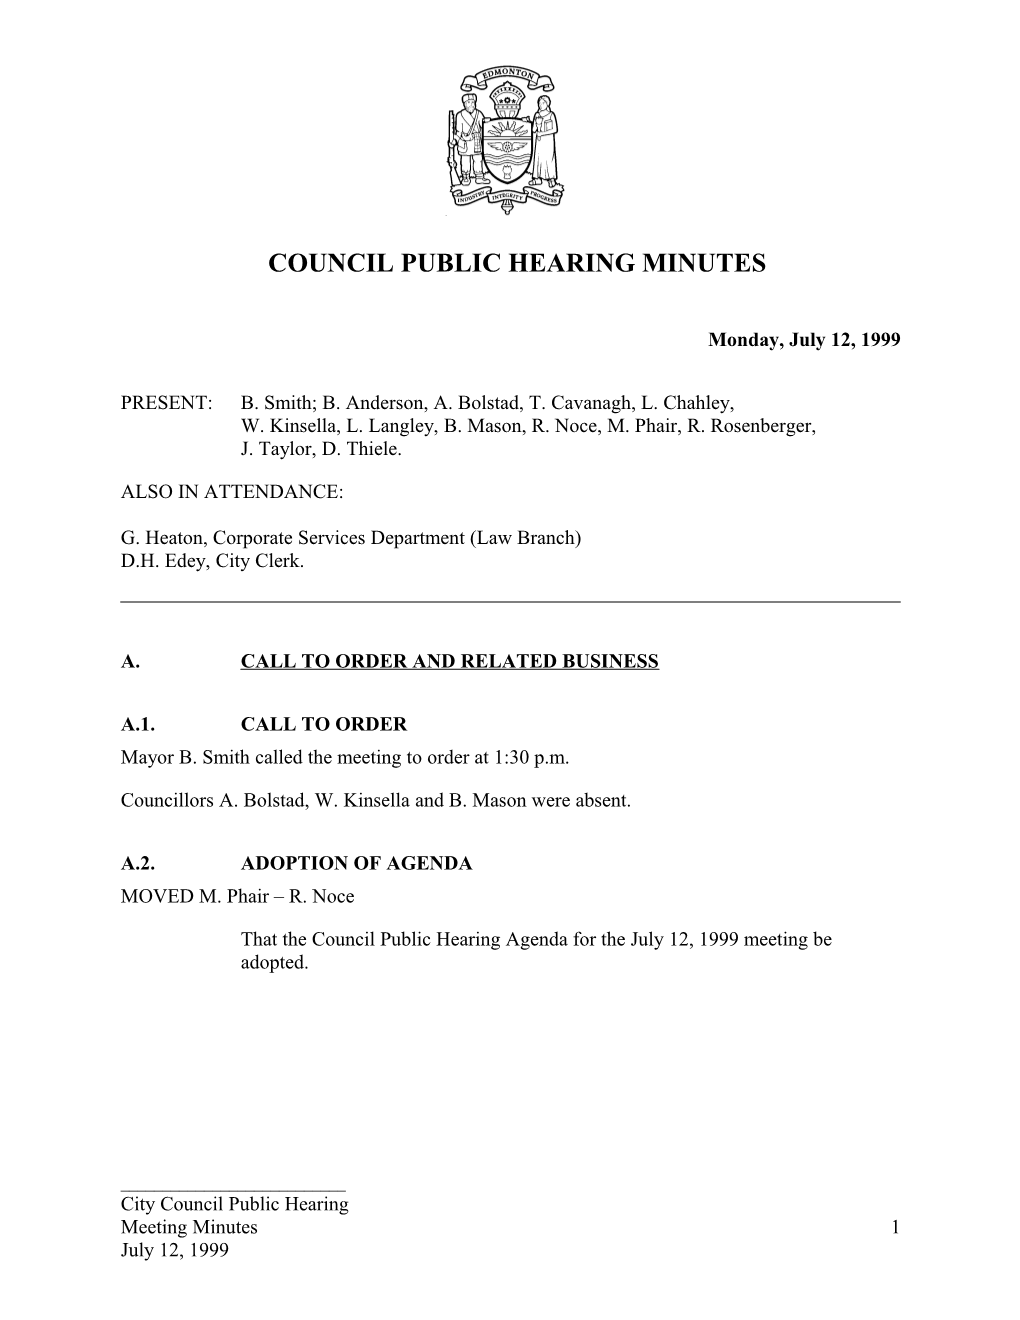 Minutes for City Council July 12, 1999 Meeting